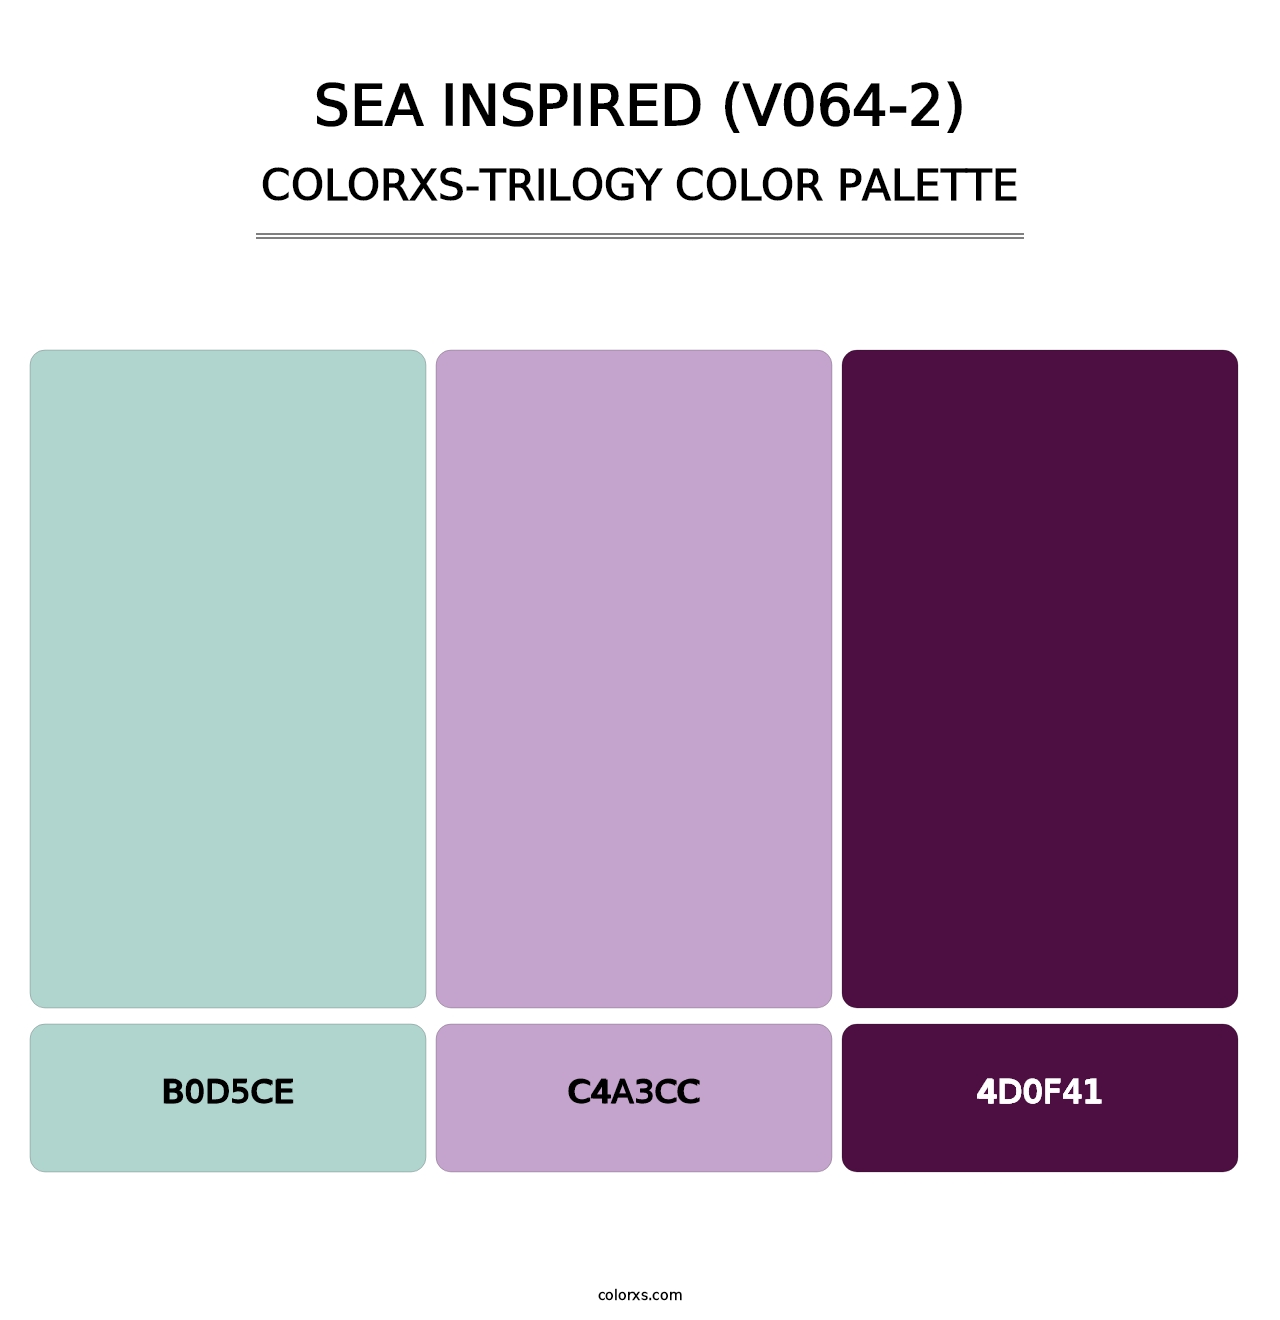 Sea Inspired (V064-2) - Colorxs Trilogy Palette